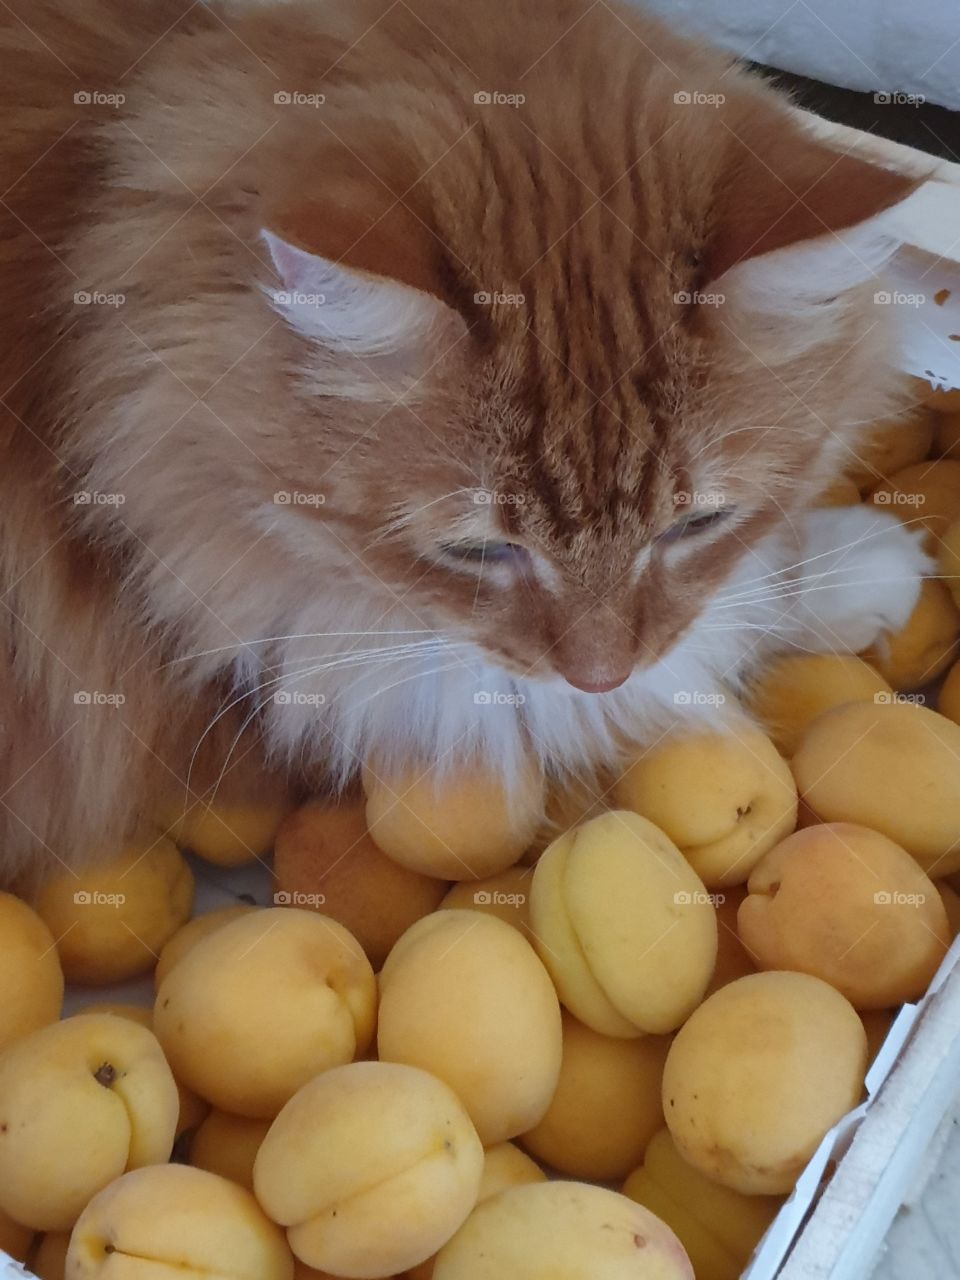 cat-apricot, in the South grew